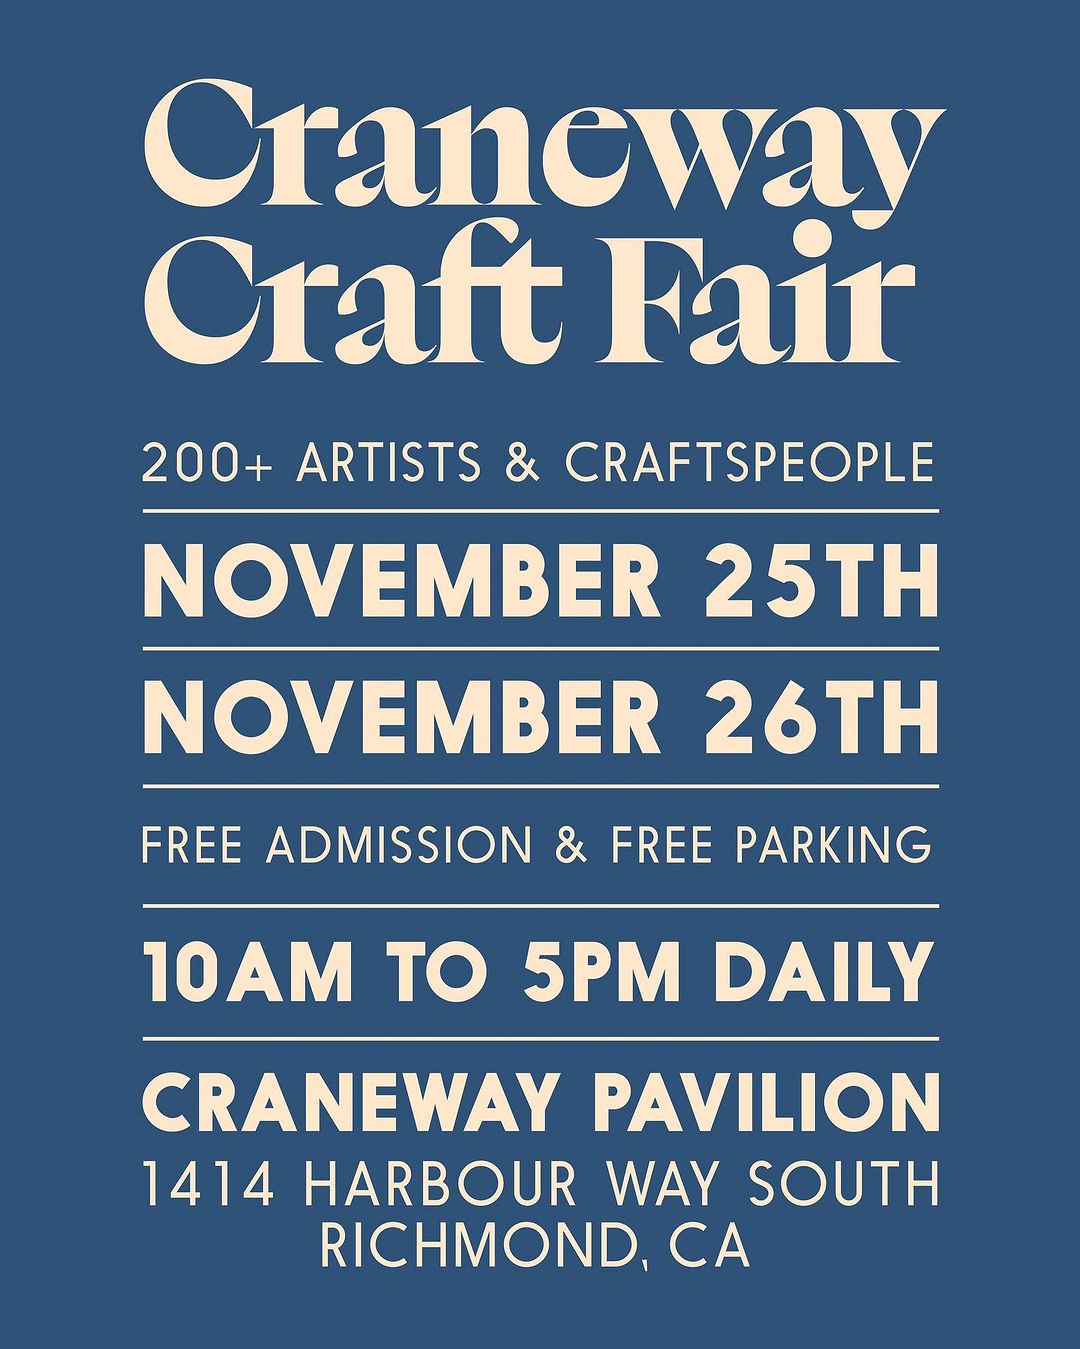 A flyer: peach serif text on a navy blue background. Craneway Craft Fair 200+ artists & craftspeople November 25th November 26th Free Admission & Free Parking 10am to 5pm daily Craneway Pavillion 1414 Harbour Way South, Richmond CA